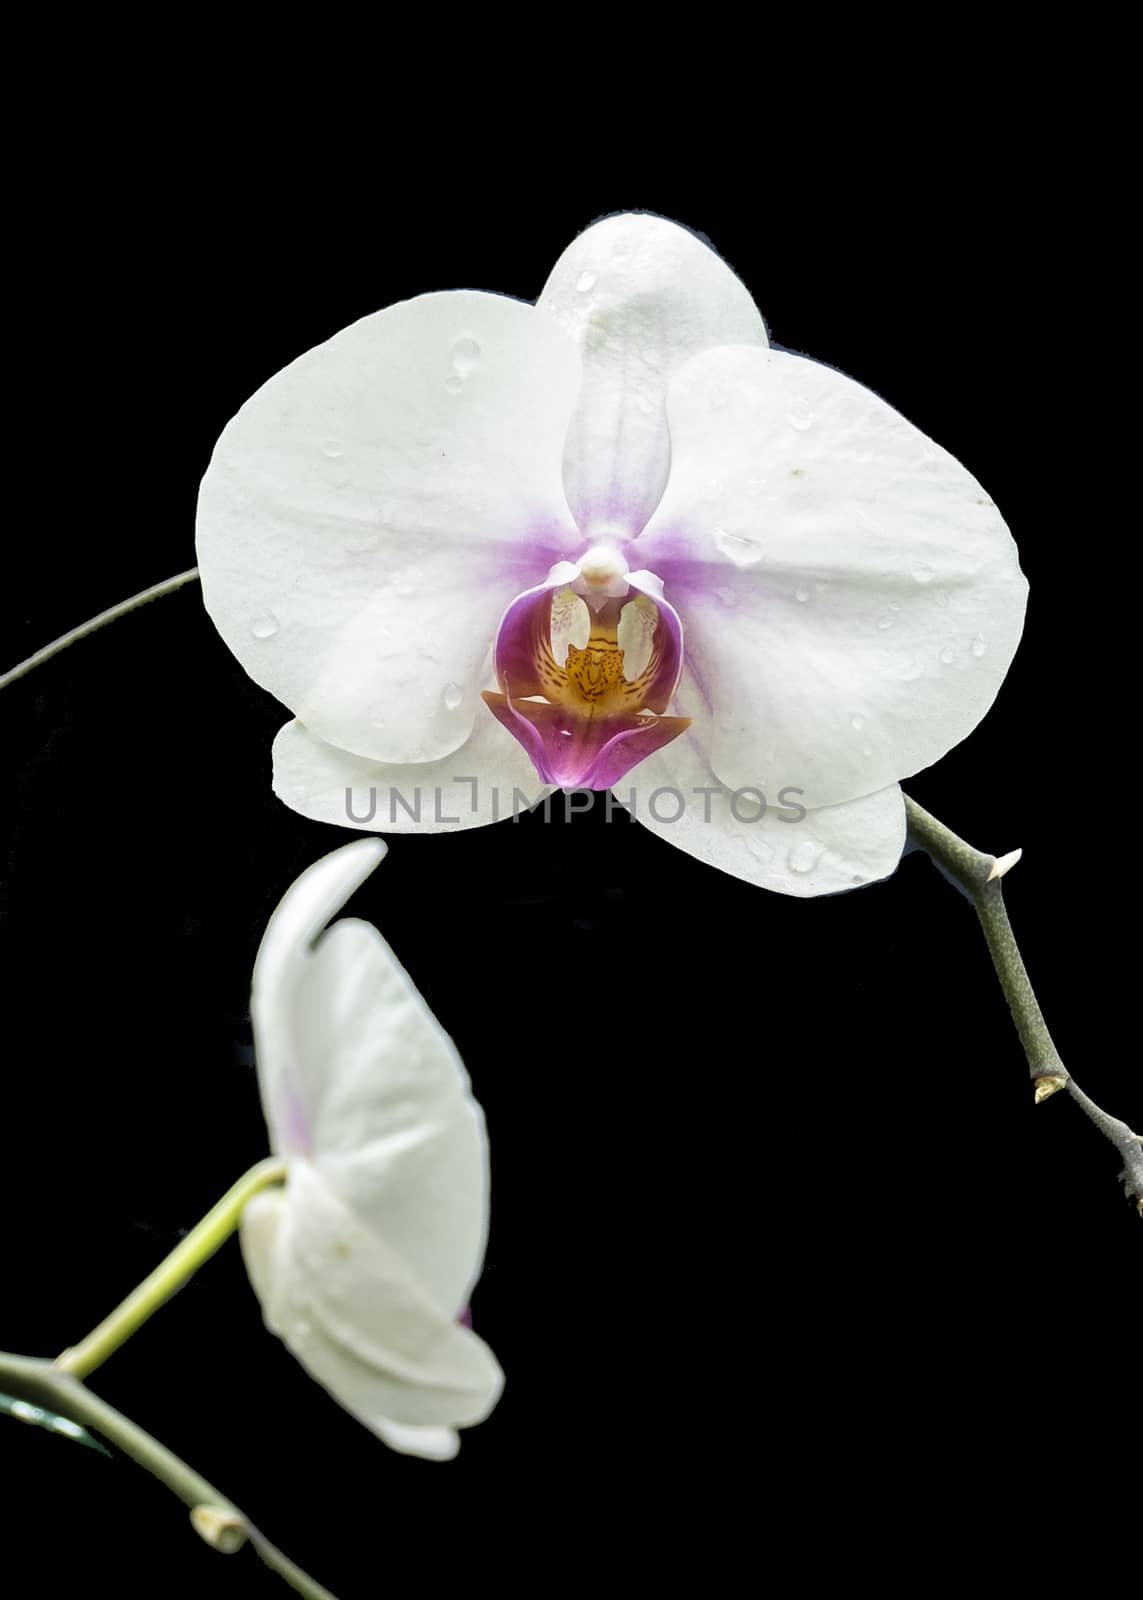 The white orchid in Queen Sirikit Botanic Garden of Chiang Mai, Thailand.